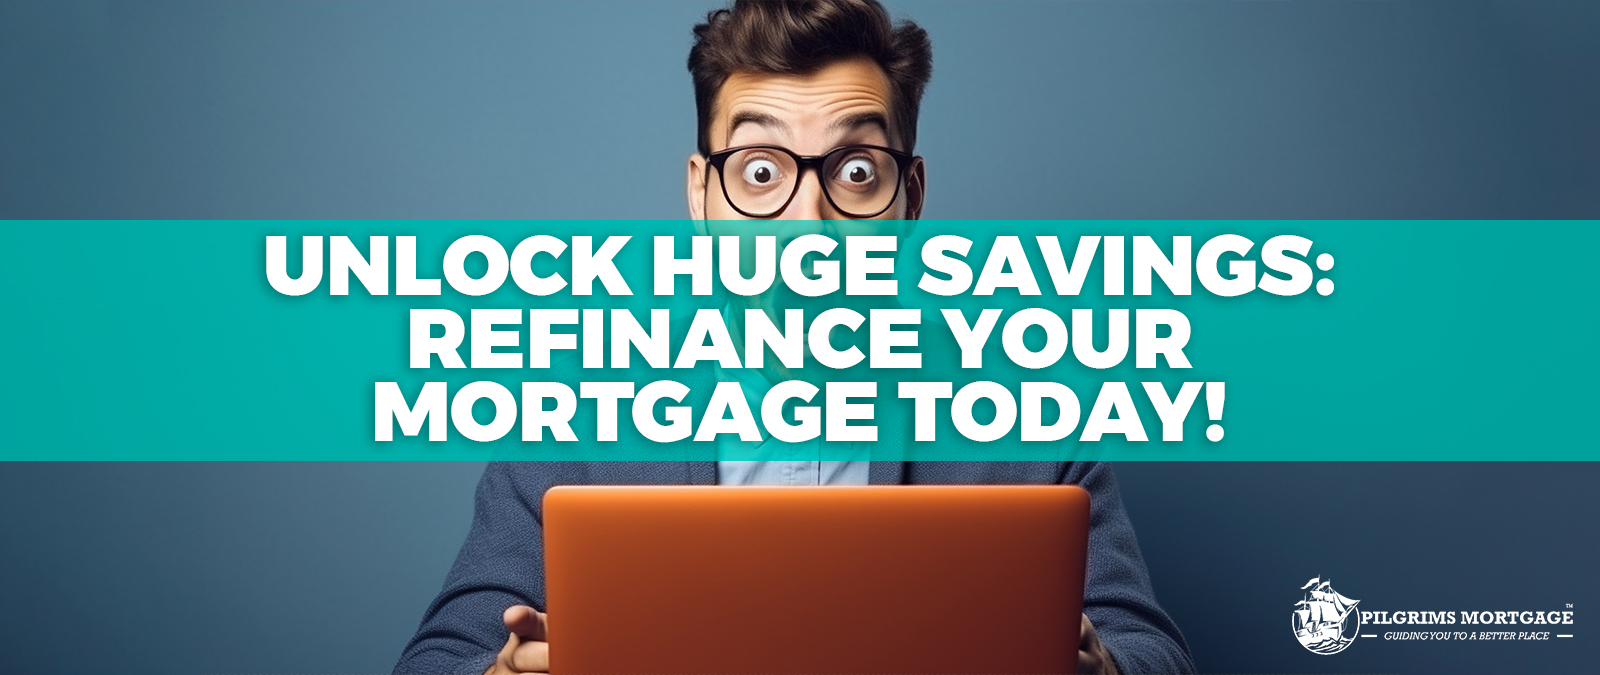 Save BIG By Refinancing Your 1